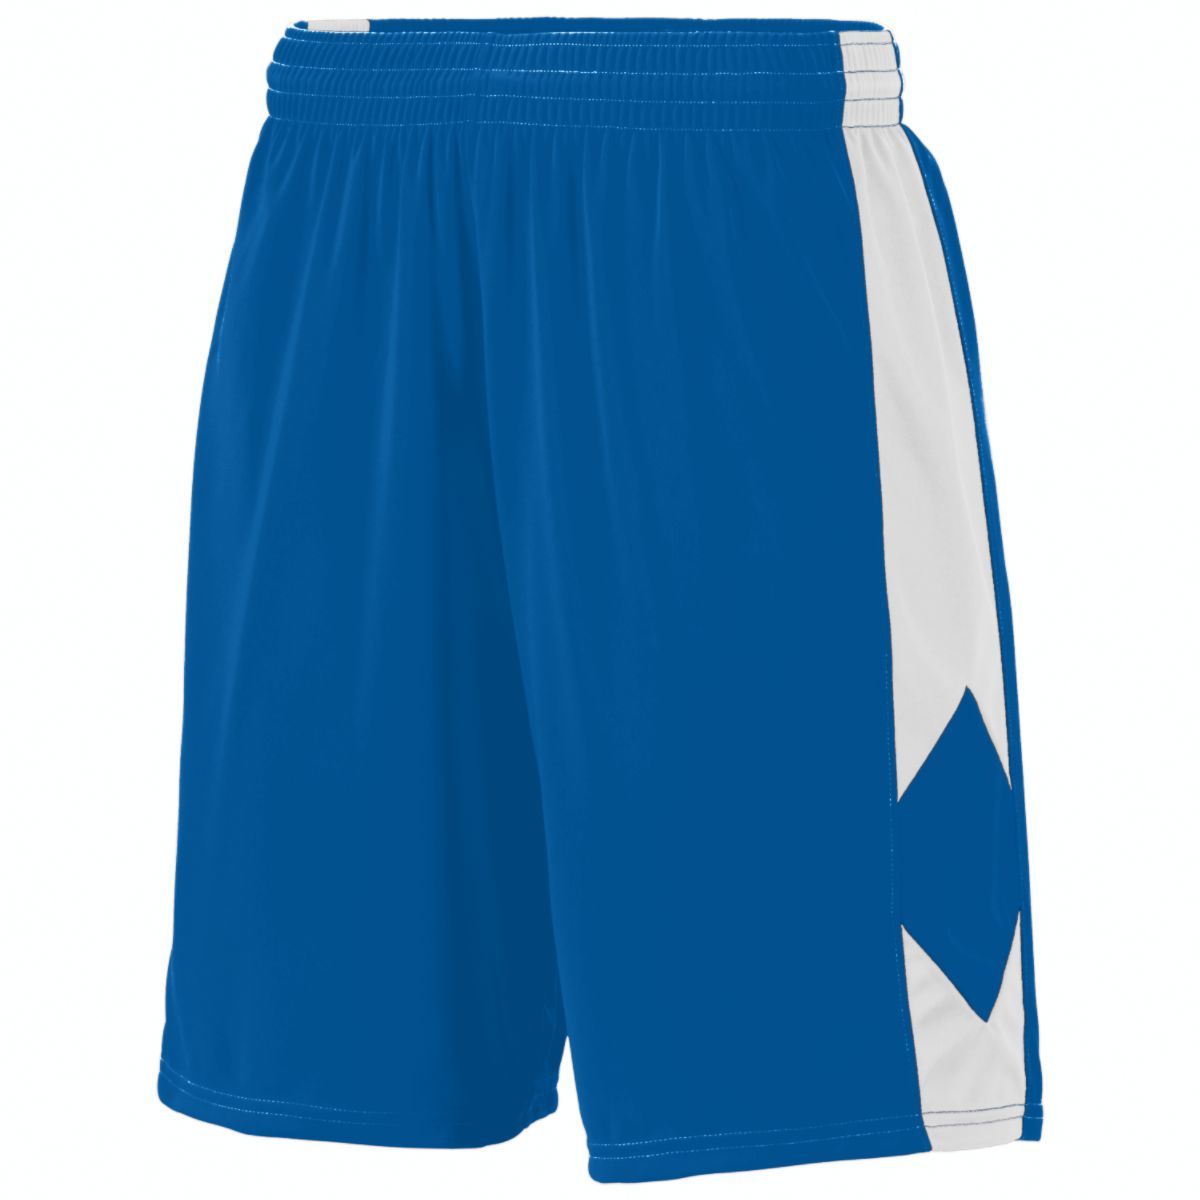 Augusta Sportswear Youth Block Out Shorts in Royal/White  -Part of the Youth, Youth-Shorts, Augusta-Products, Basketball, All-Sports, All-Sports-1 product lines at KanaleyCreations.com